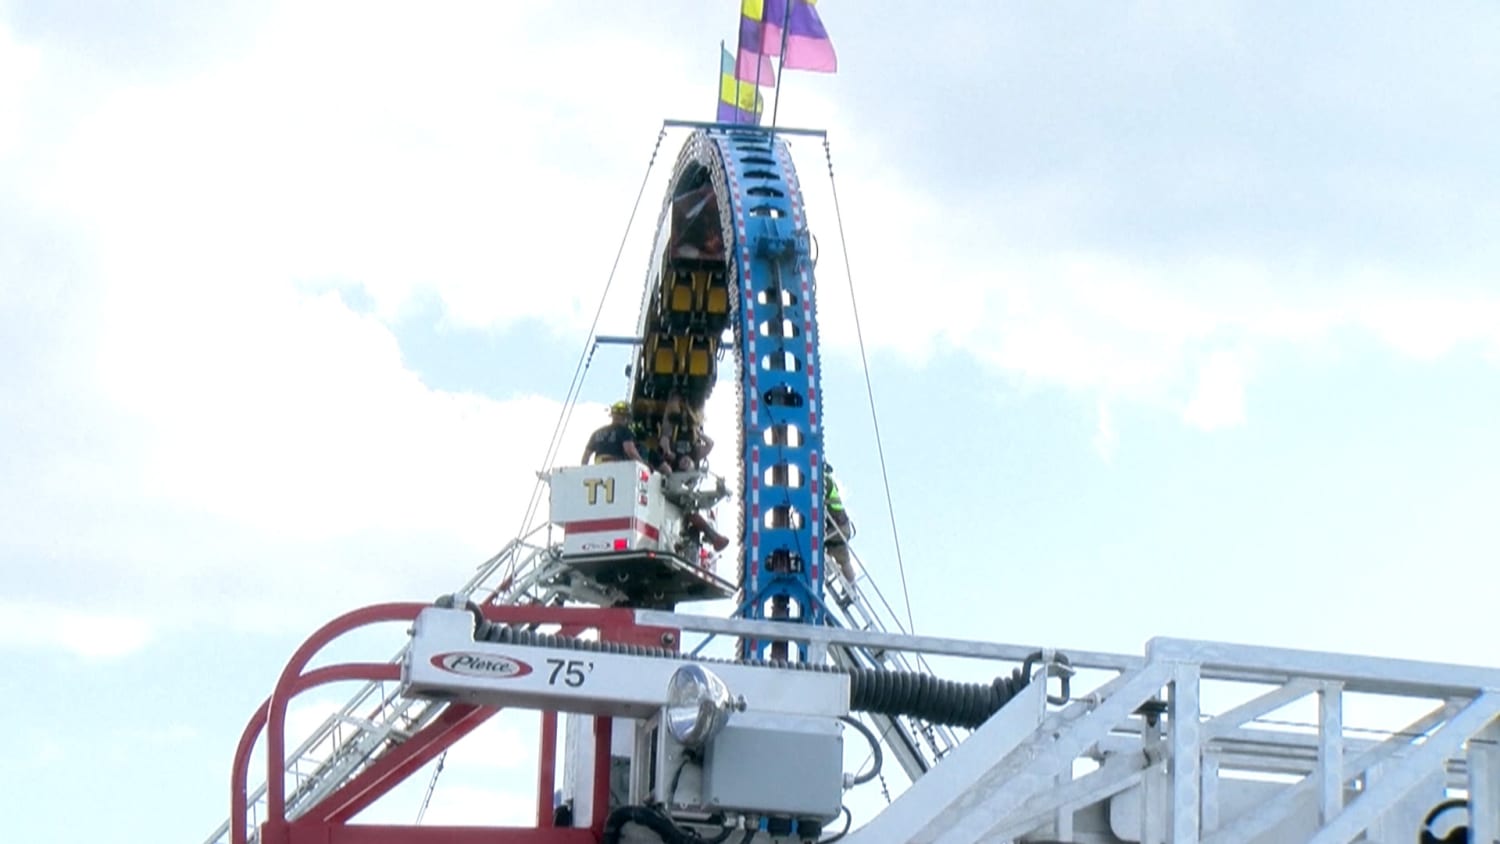 Roller coaster riders stuck upside down for hours after ‘mechanical failure’ at Wisconsin festival